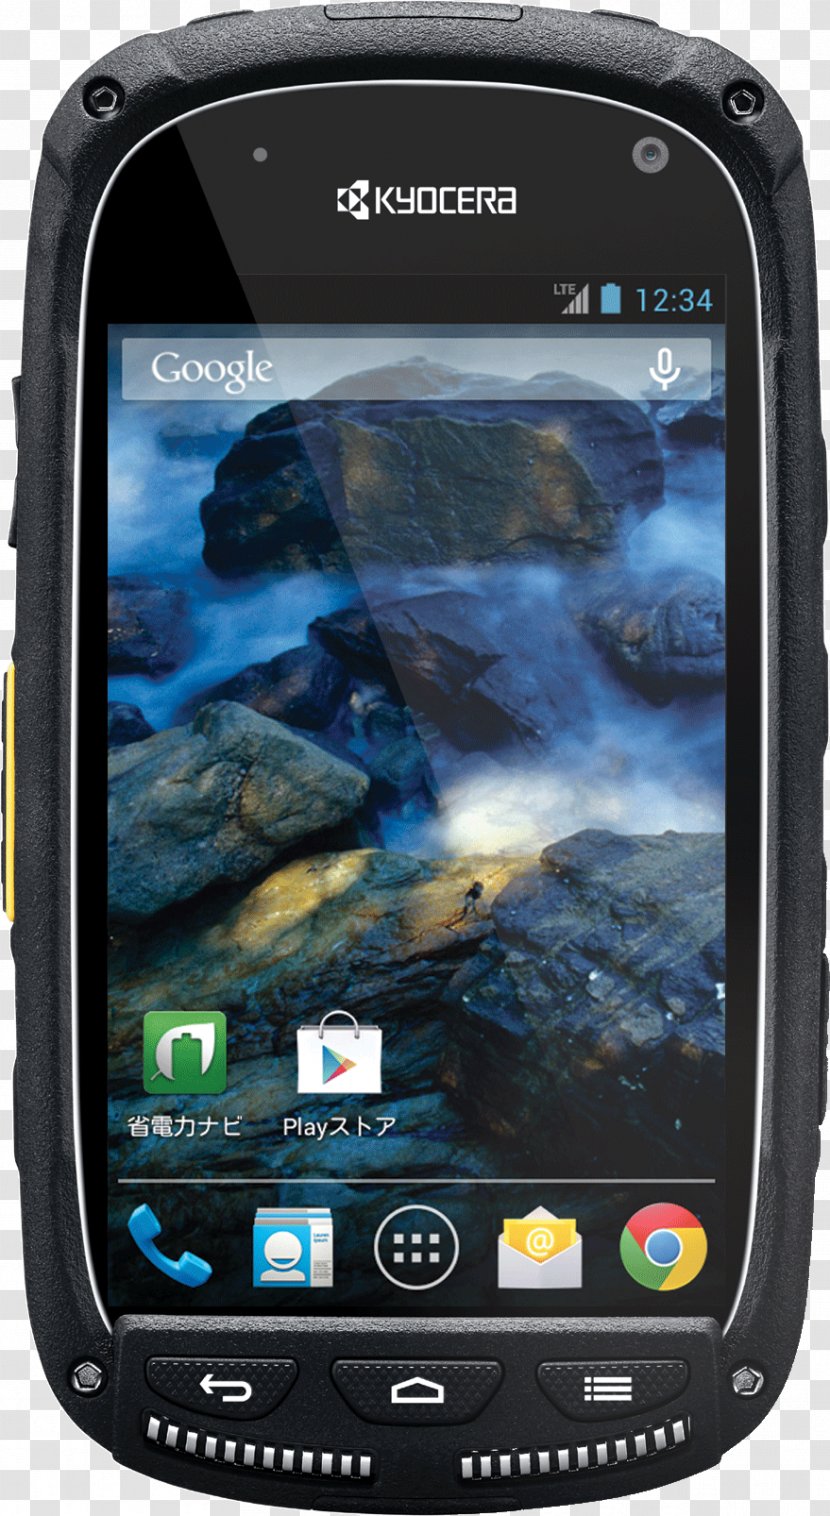 Kyocera Hydro Smartphone Product Manuals Torque - Portable Communications Device Transparent PNG